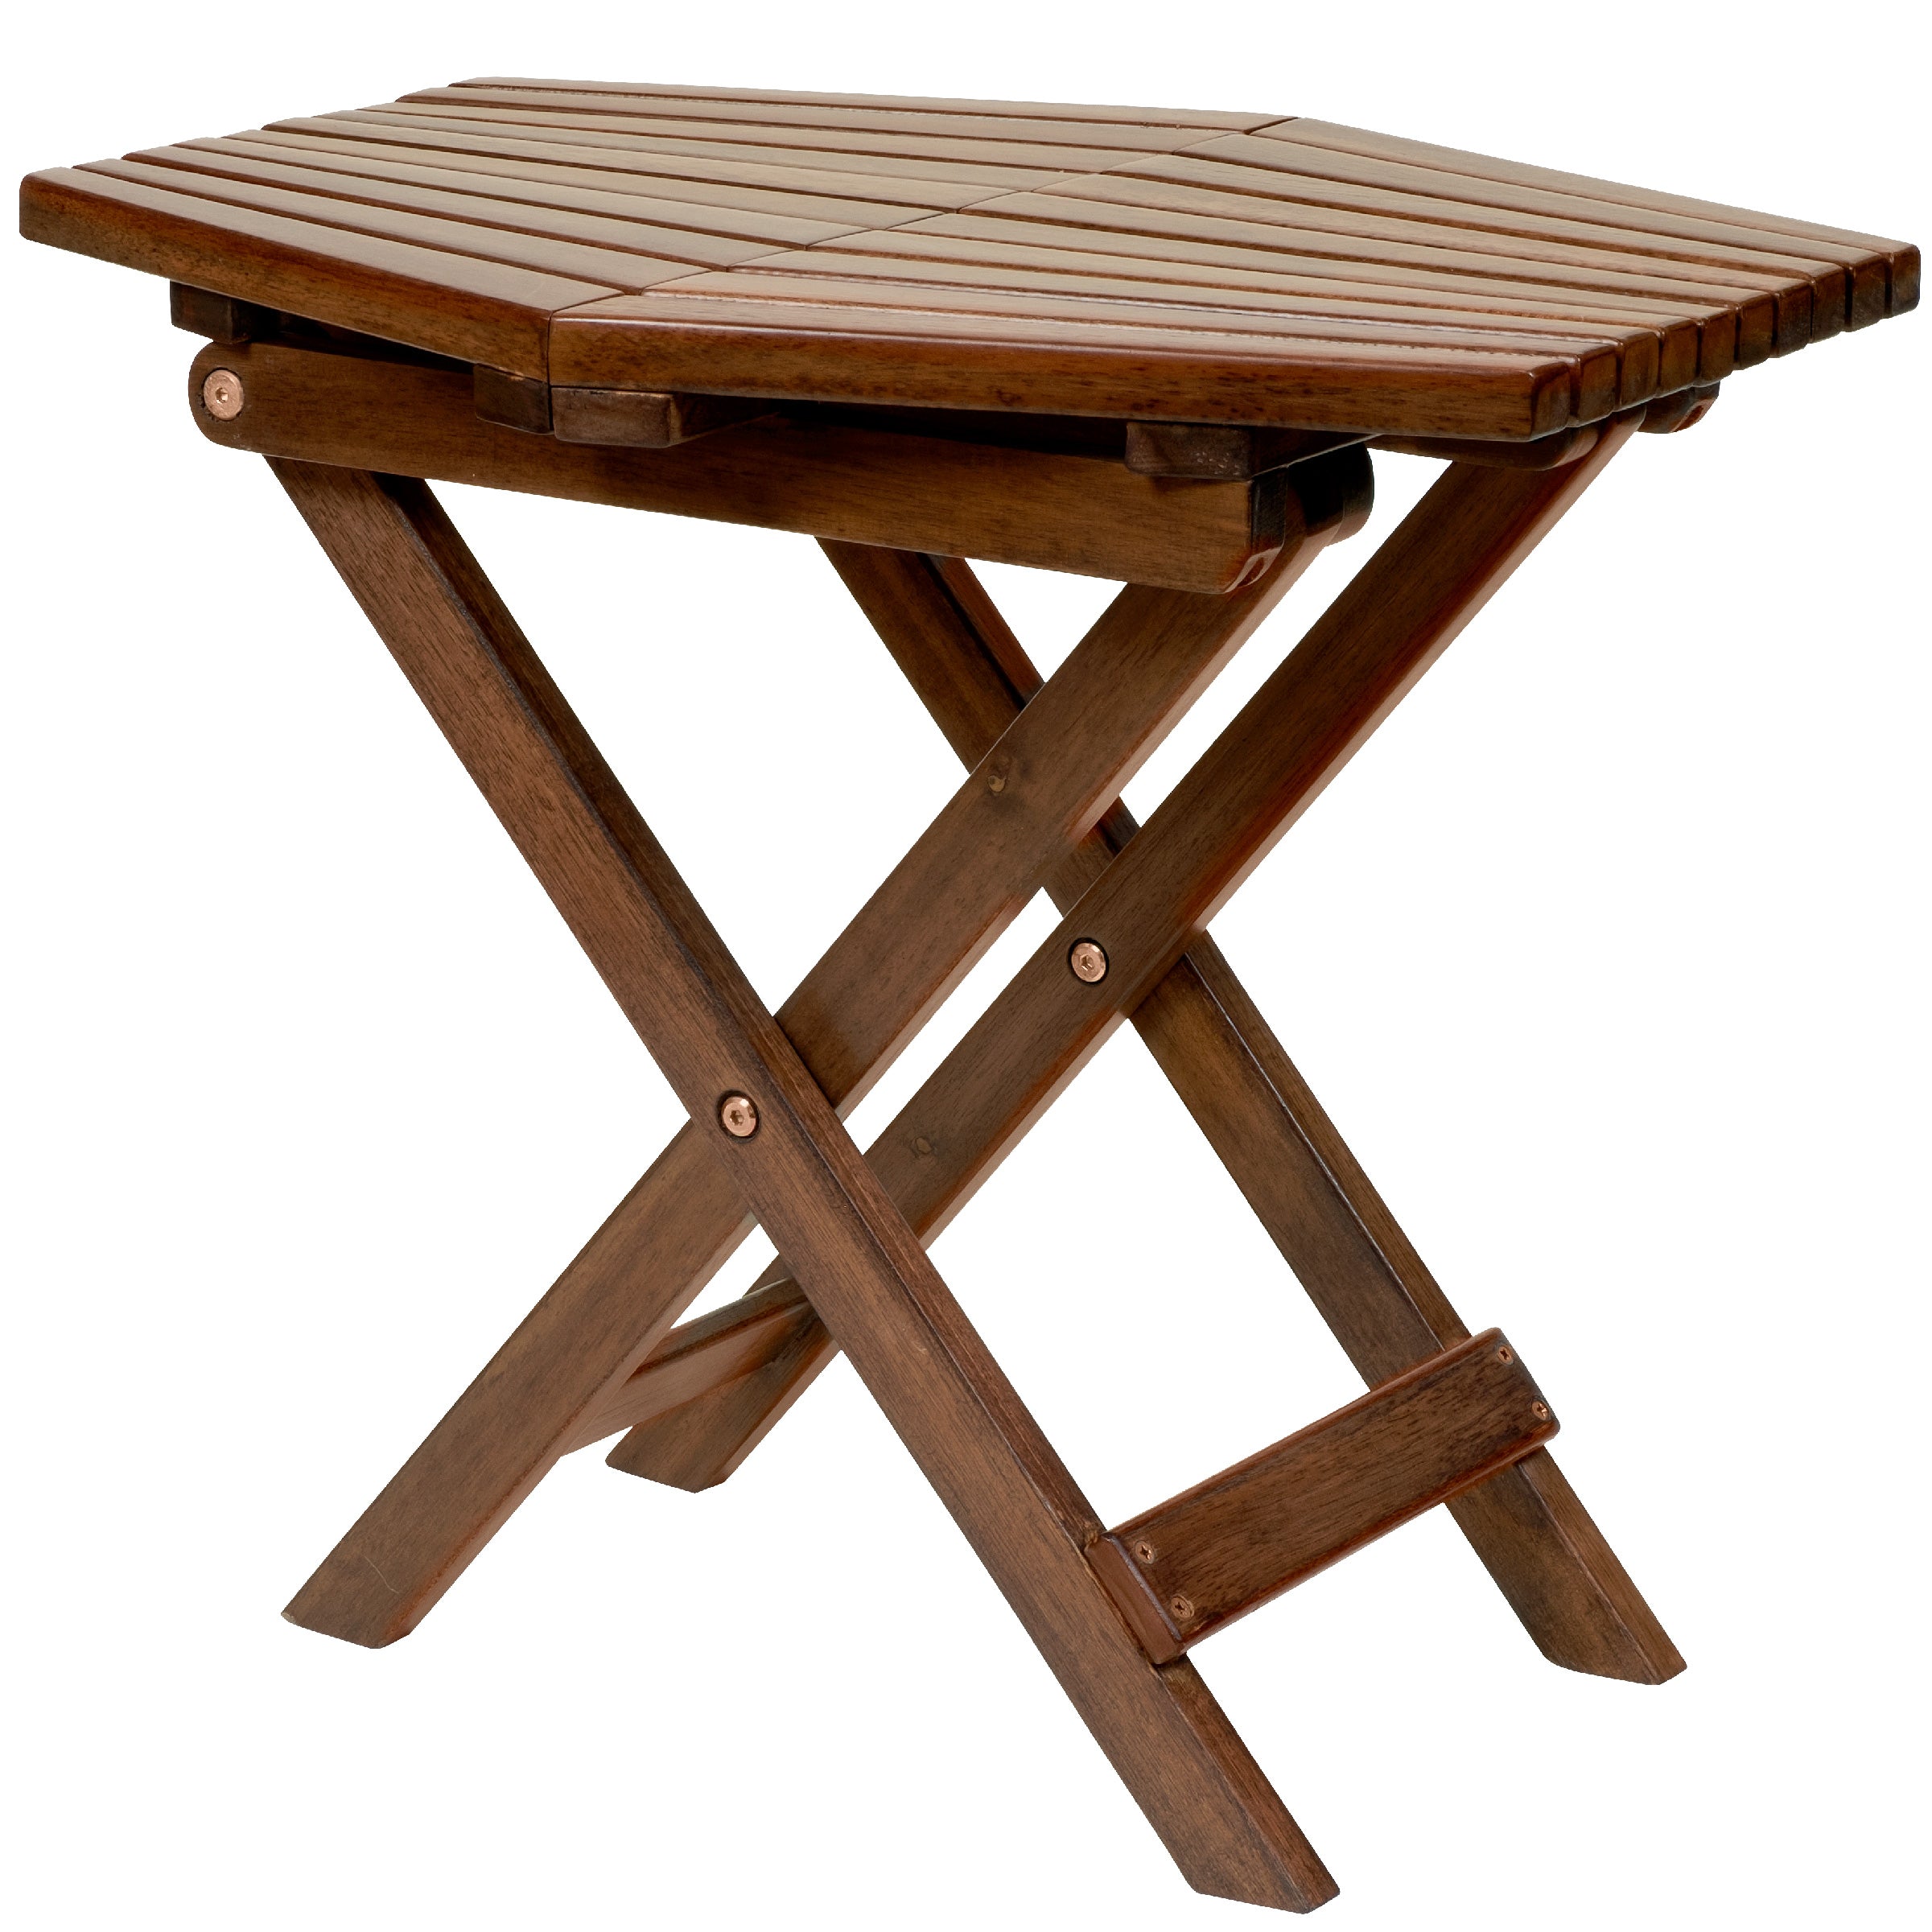 Tamarack Table - CleverMade